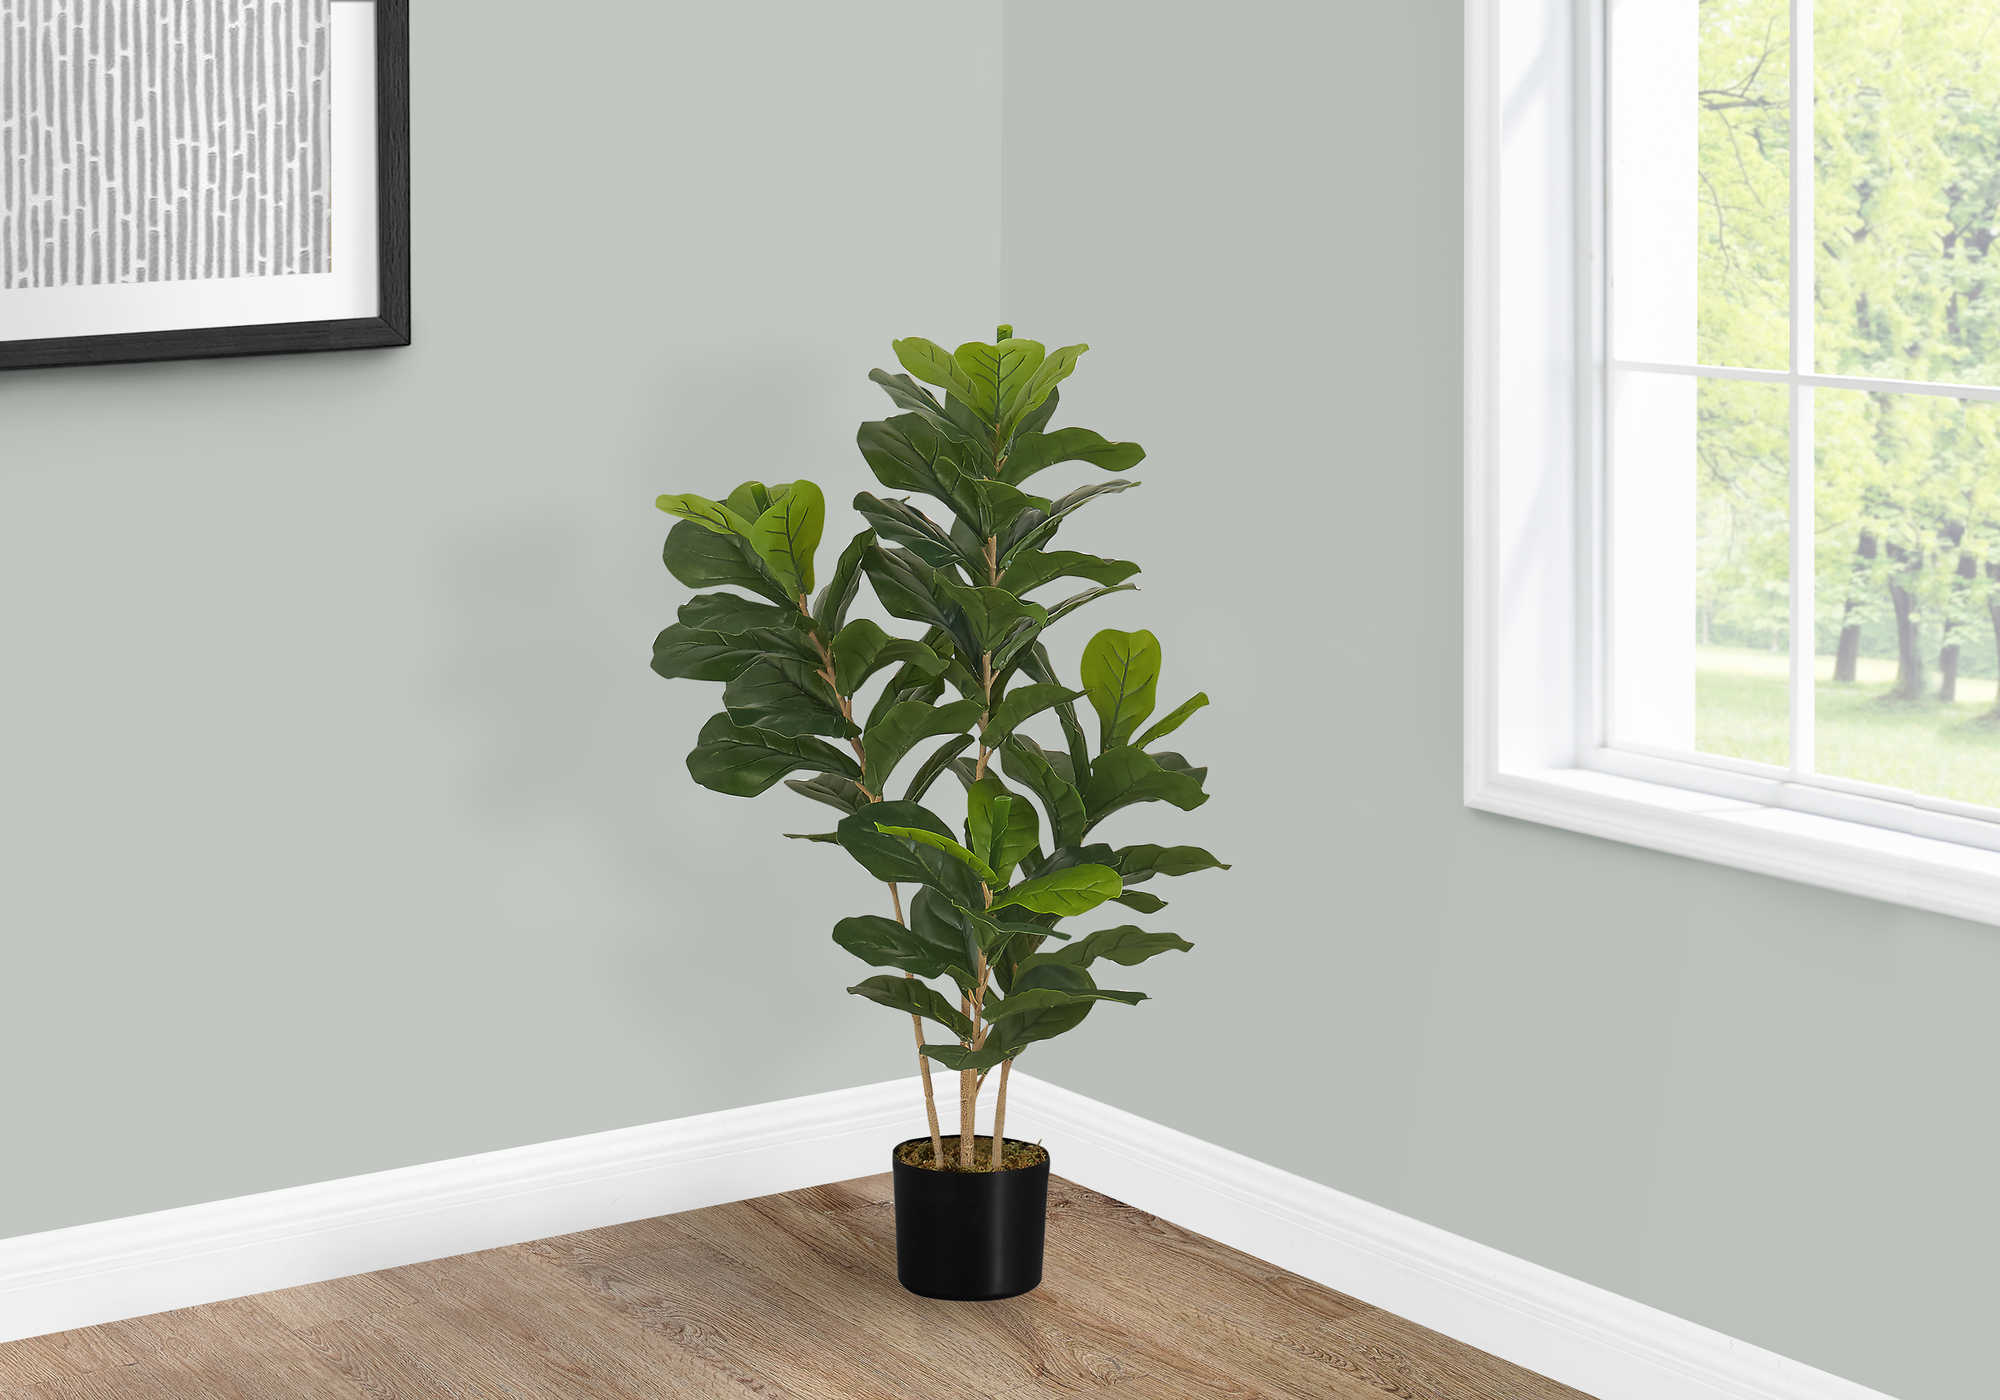 ARTIFICIAL PLANT - 41"H / INDOOR FIDDLE TREE IN A 5" POT